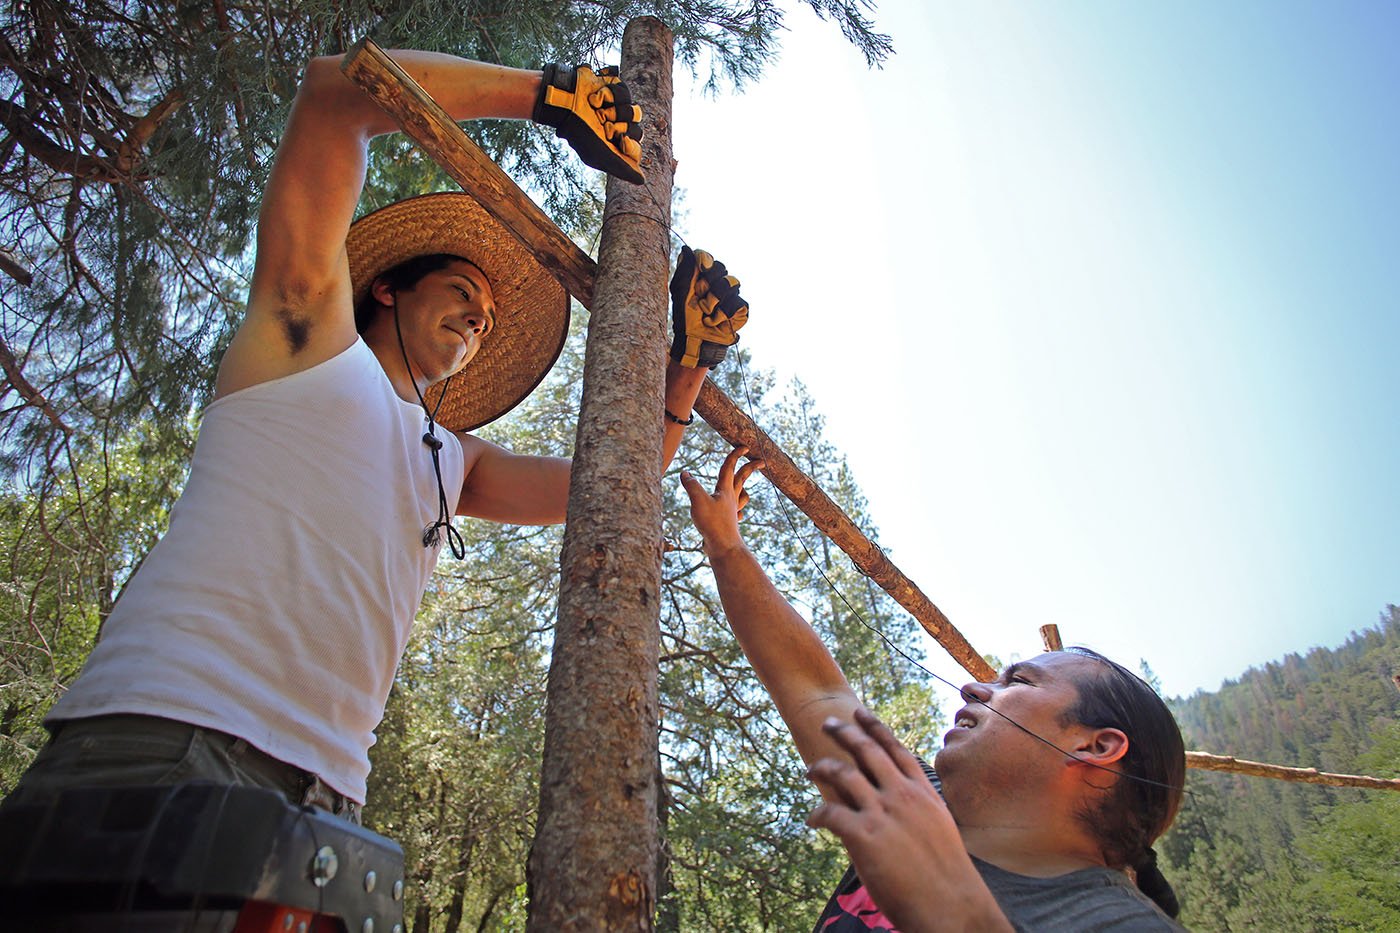  Shasta-Trinity National Forest — Construction of the ceremonial arbor requires digging holes into which the posts can be inserted and then tying posts across so that Douglas fir boughs can be laid on top. July 11, 2022. Tom Levy/The Spiritual Edge 